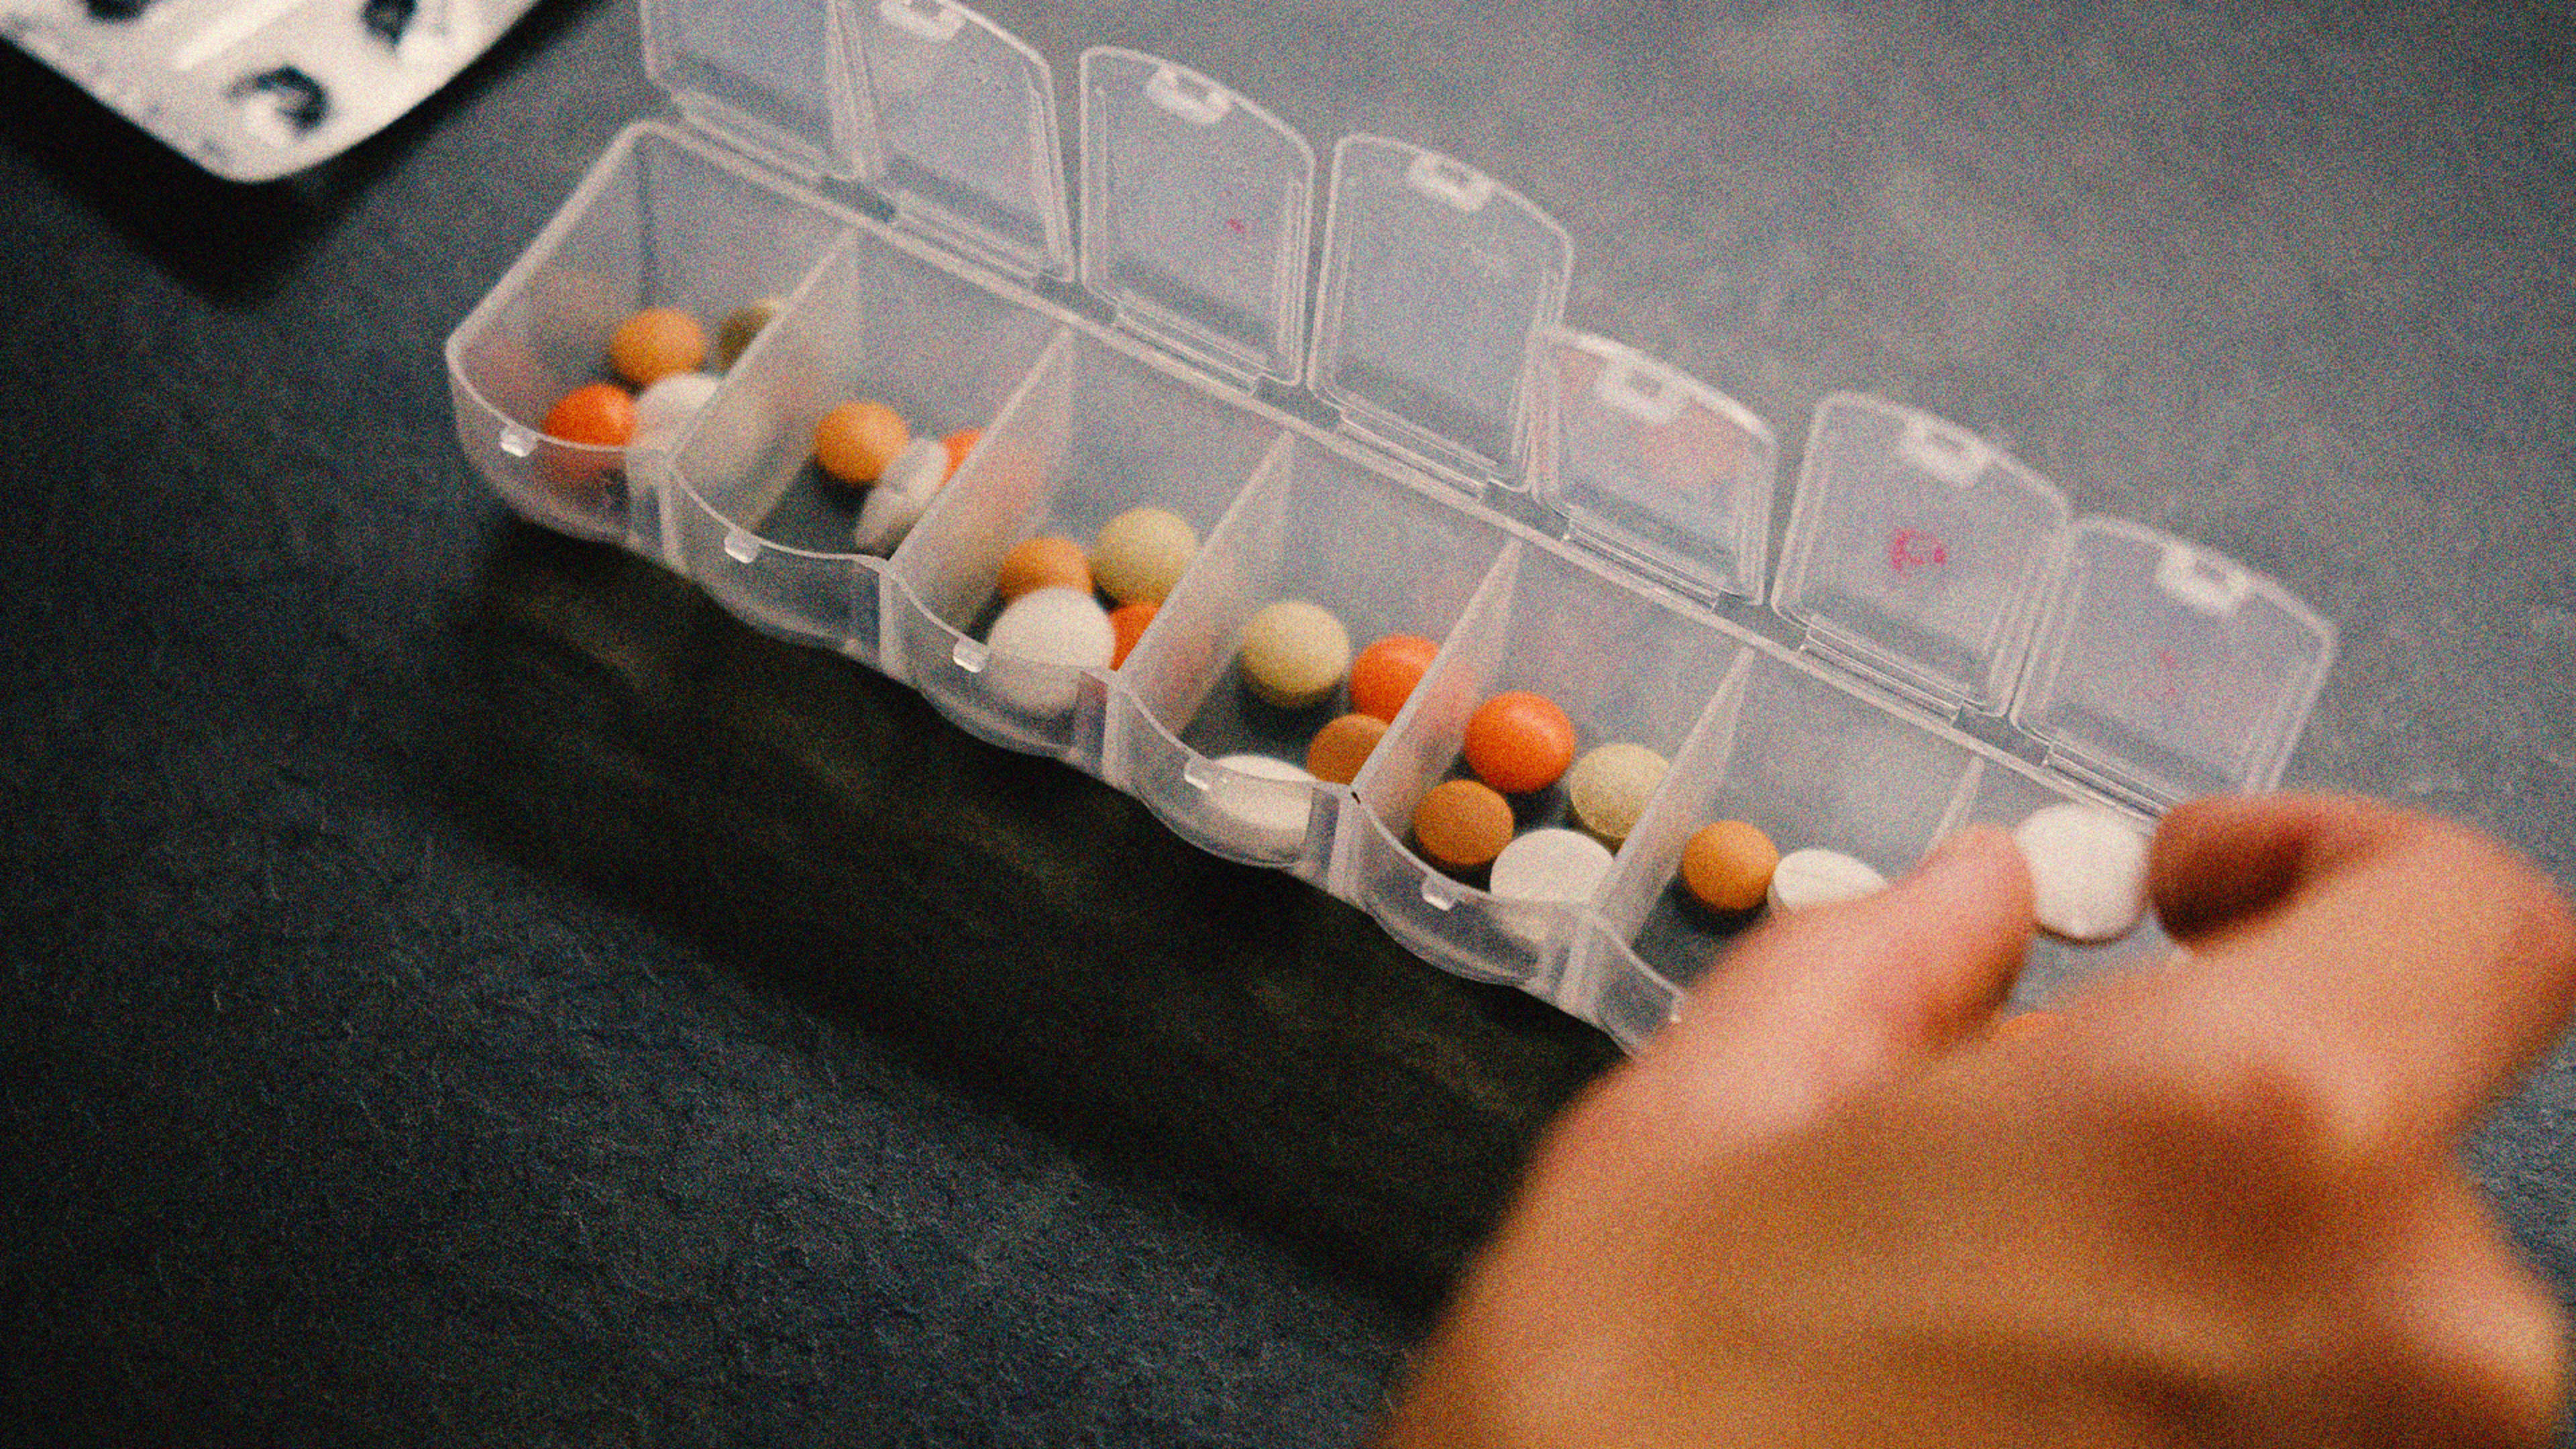 Still taking that medication? JAMA says your doctor might not tell you when to stop